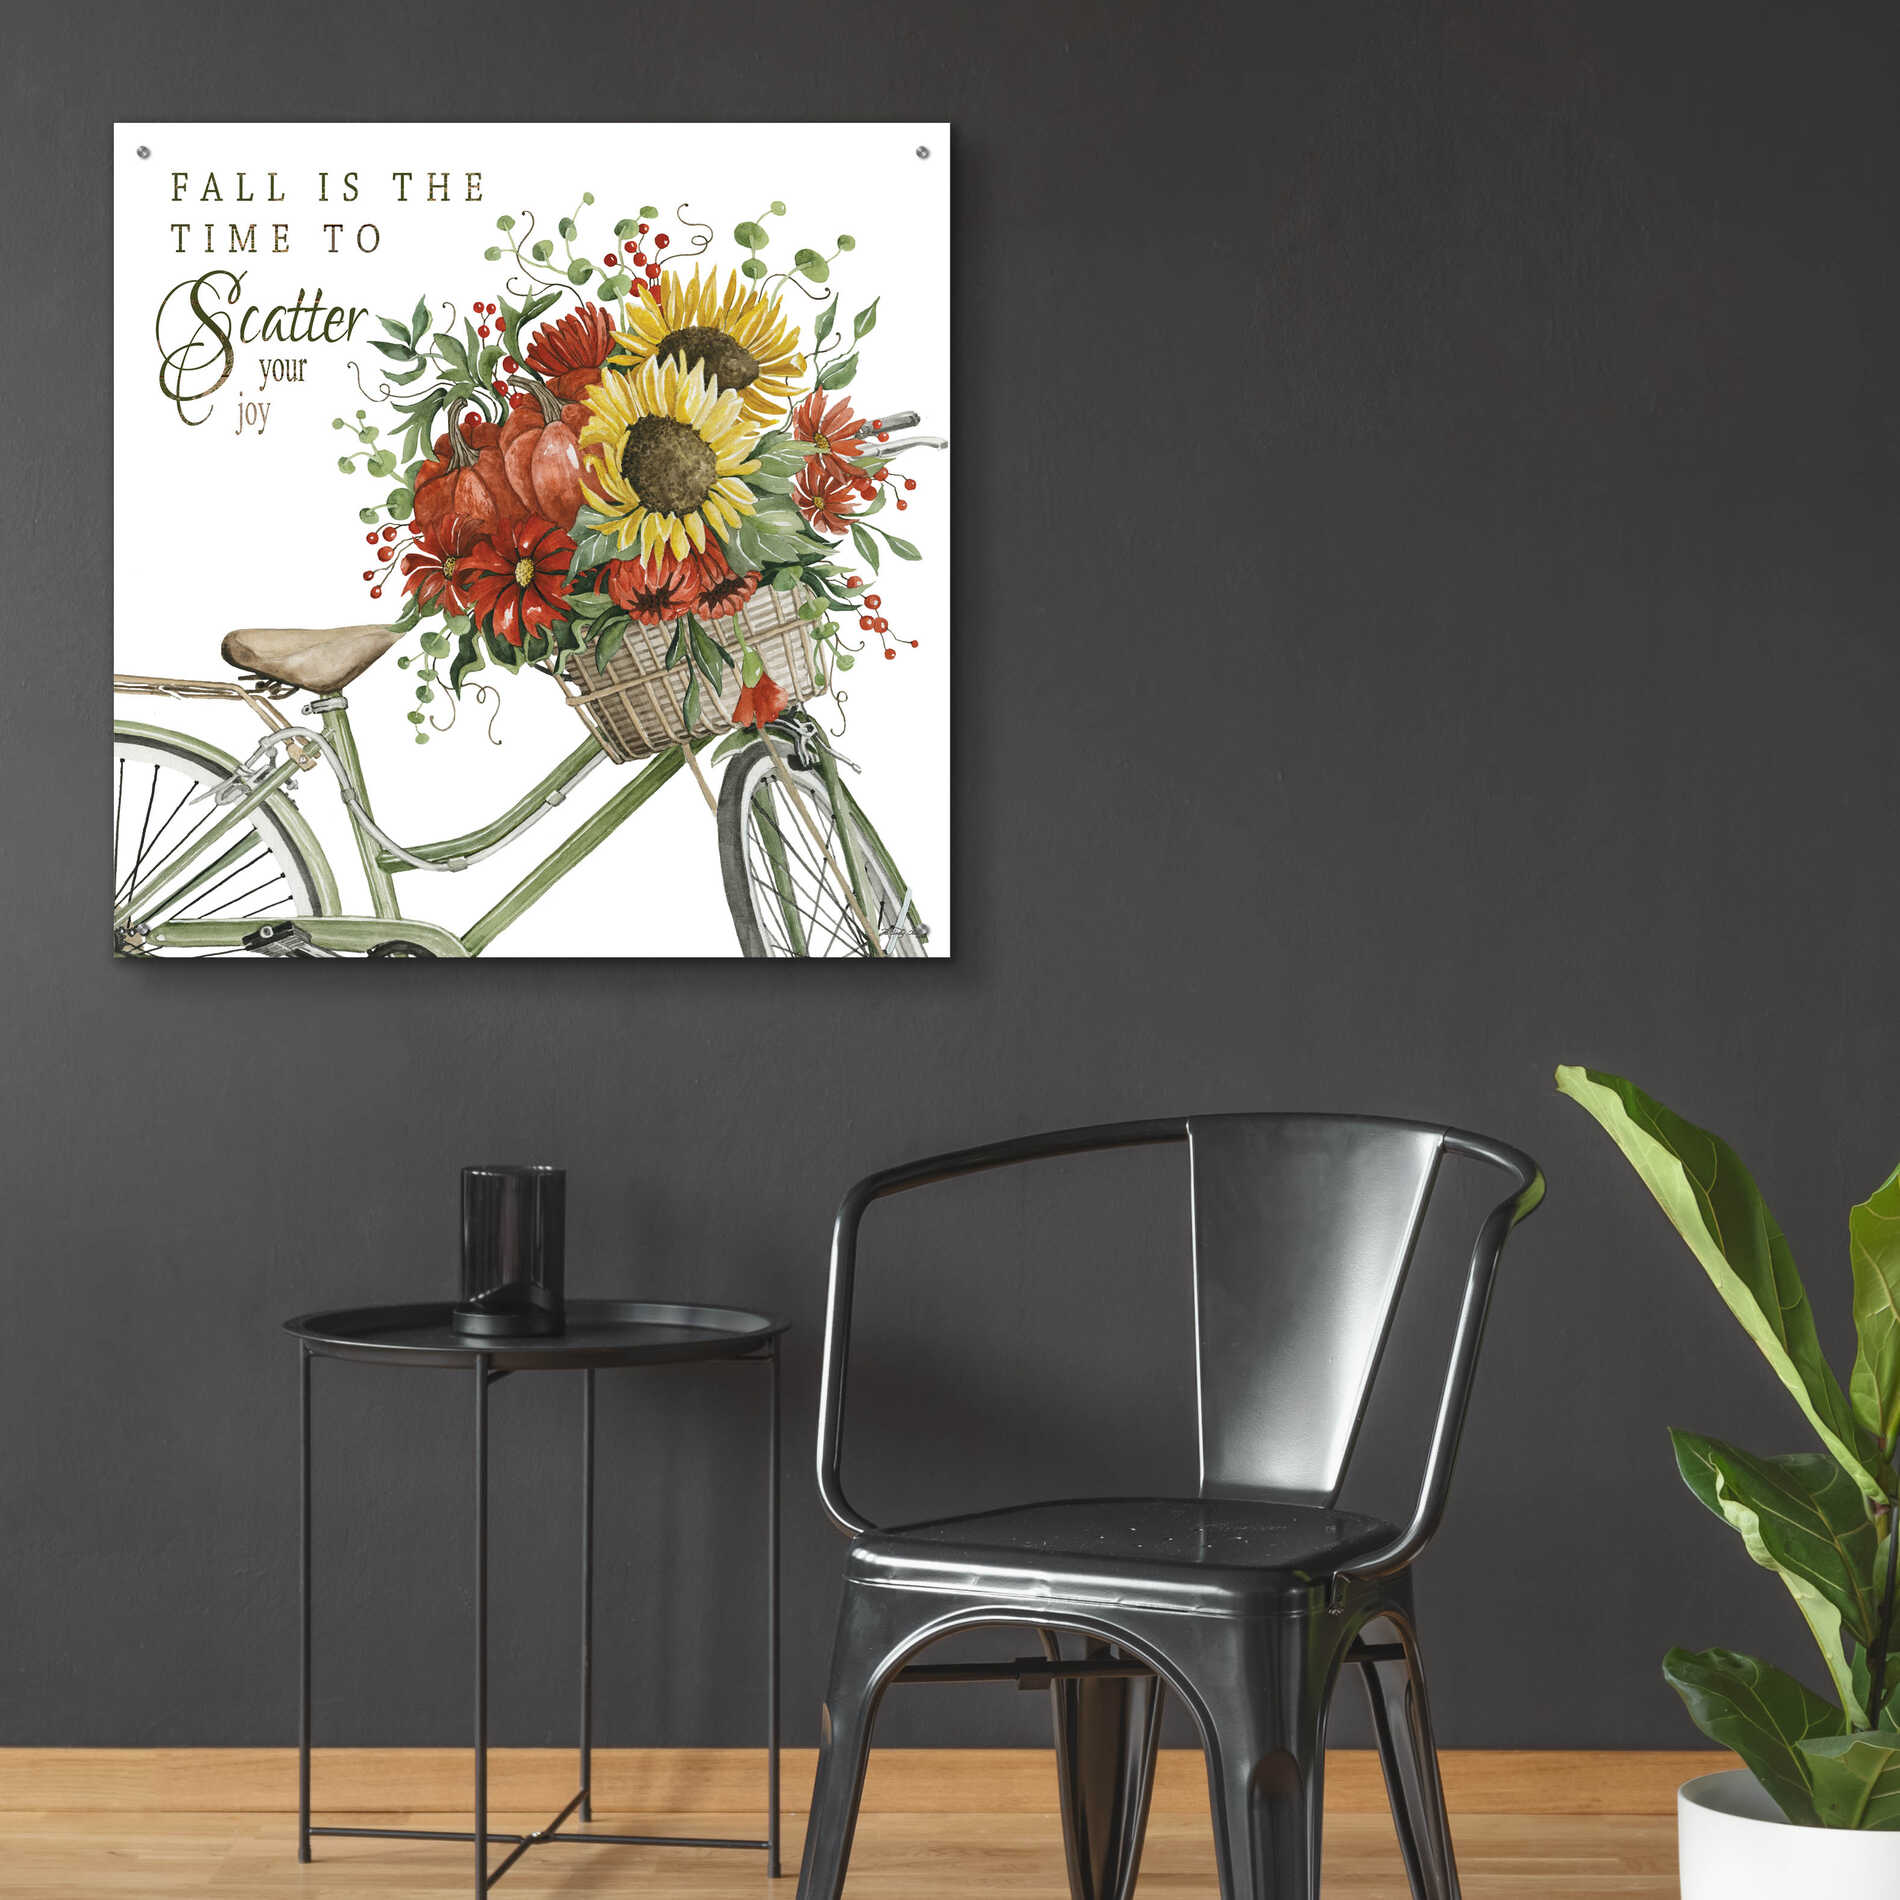 Epic Art 'Fall Is The Time To Scatter Your Joy' by Cindy Jacobs, Acrylic Glass Wall Art,36x36